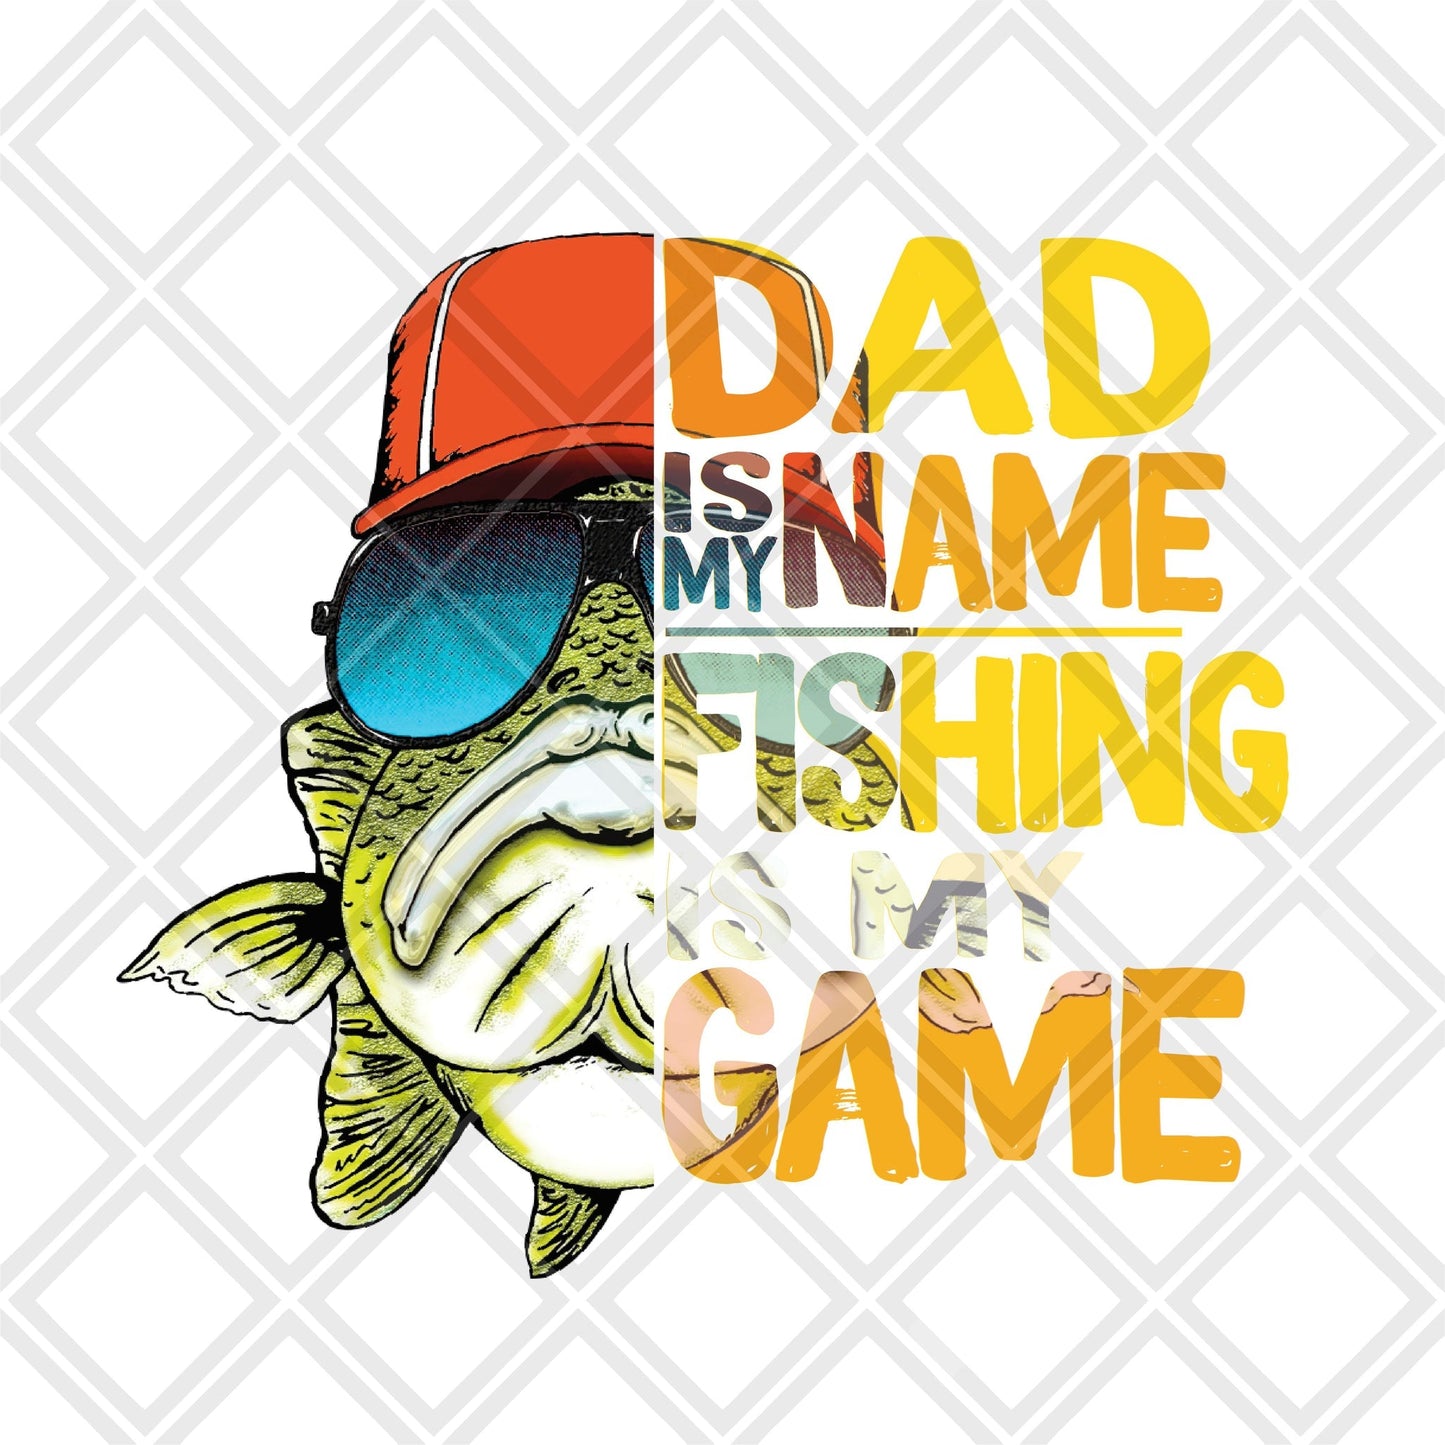 DAD IS MY NAME fishing is my game DTF TRANSFERPRINT TO ORDER